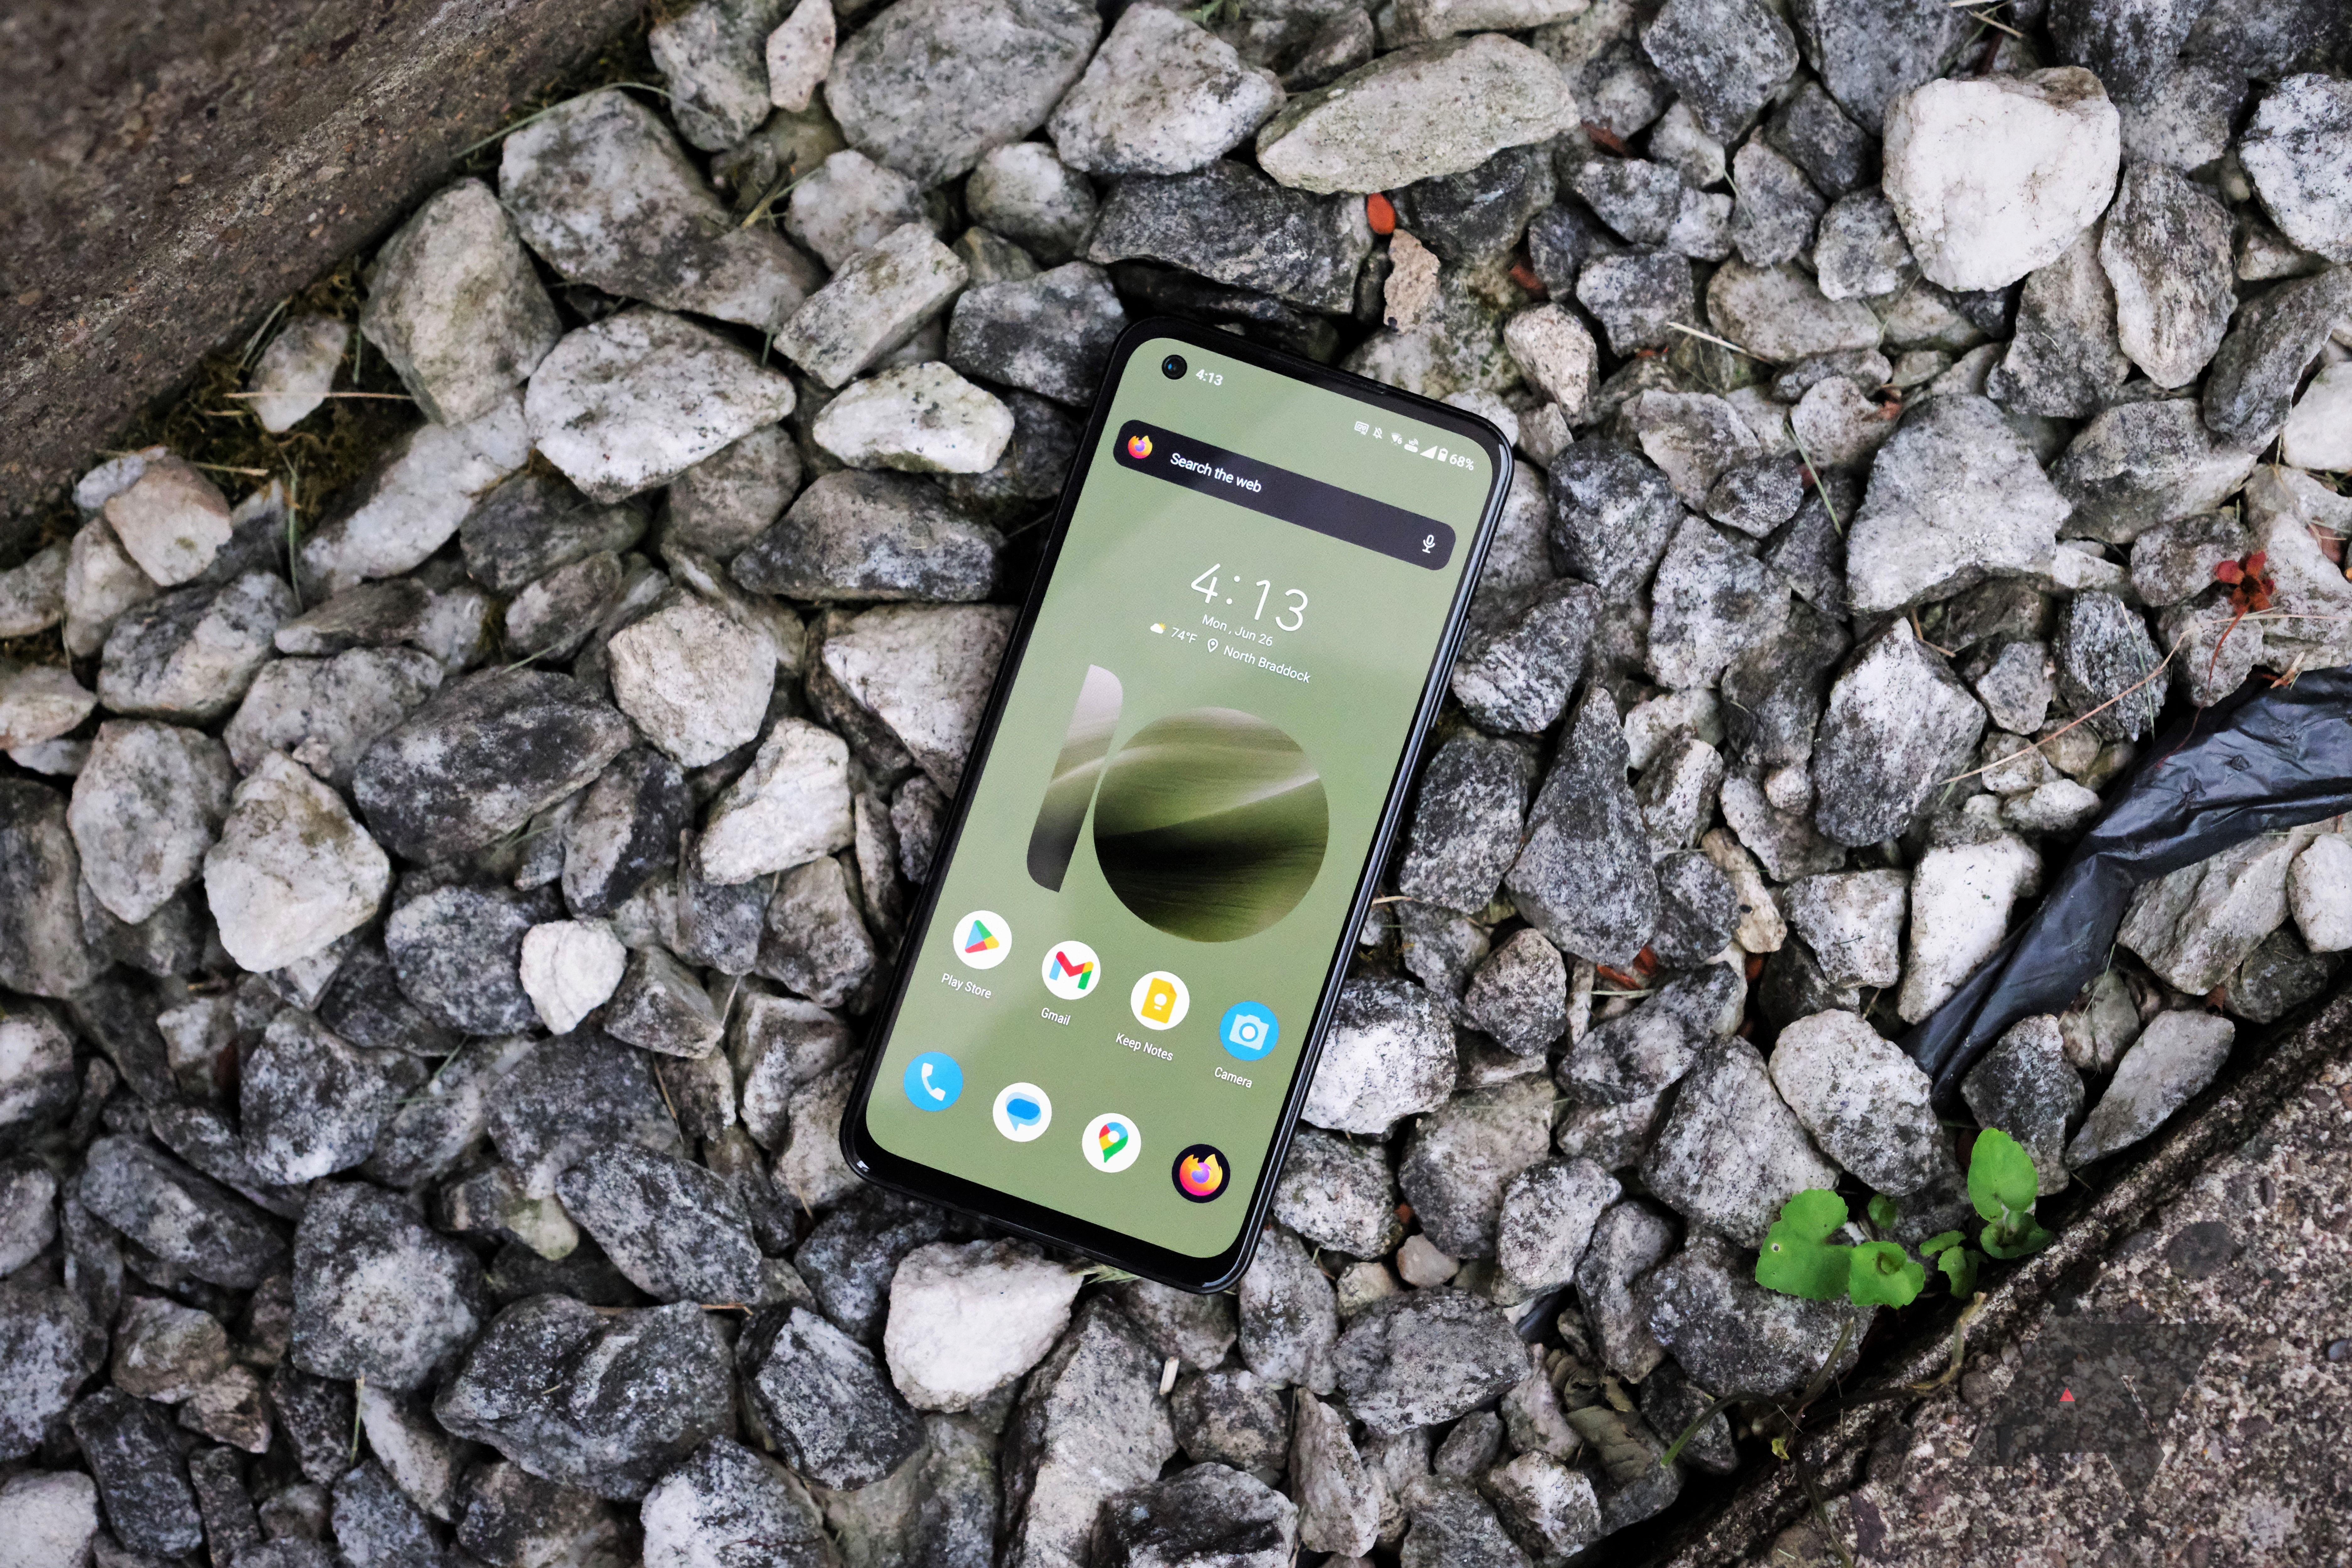 A smartphone with a green display rests on rocks.